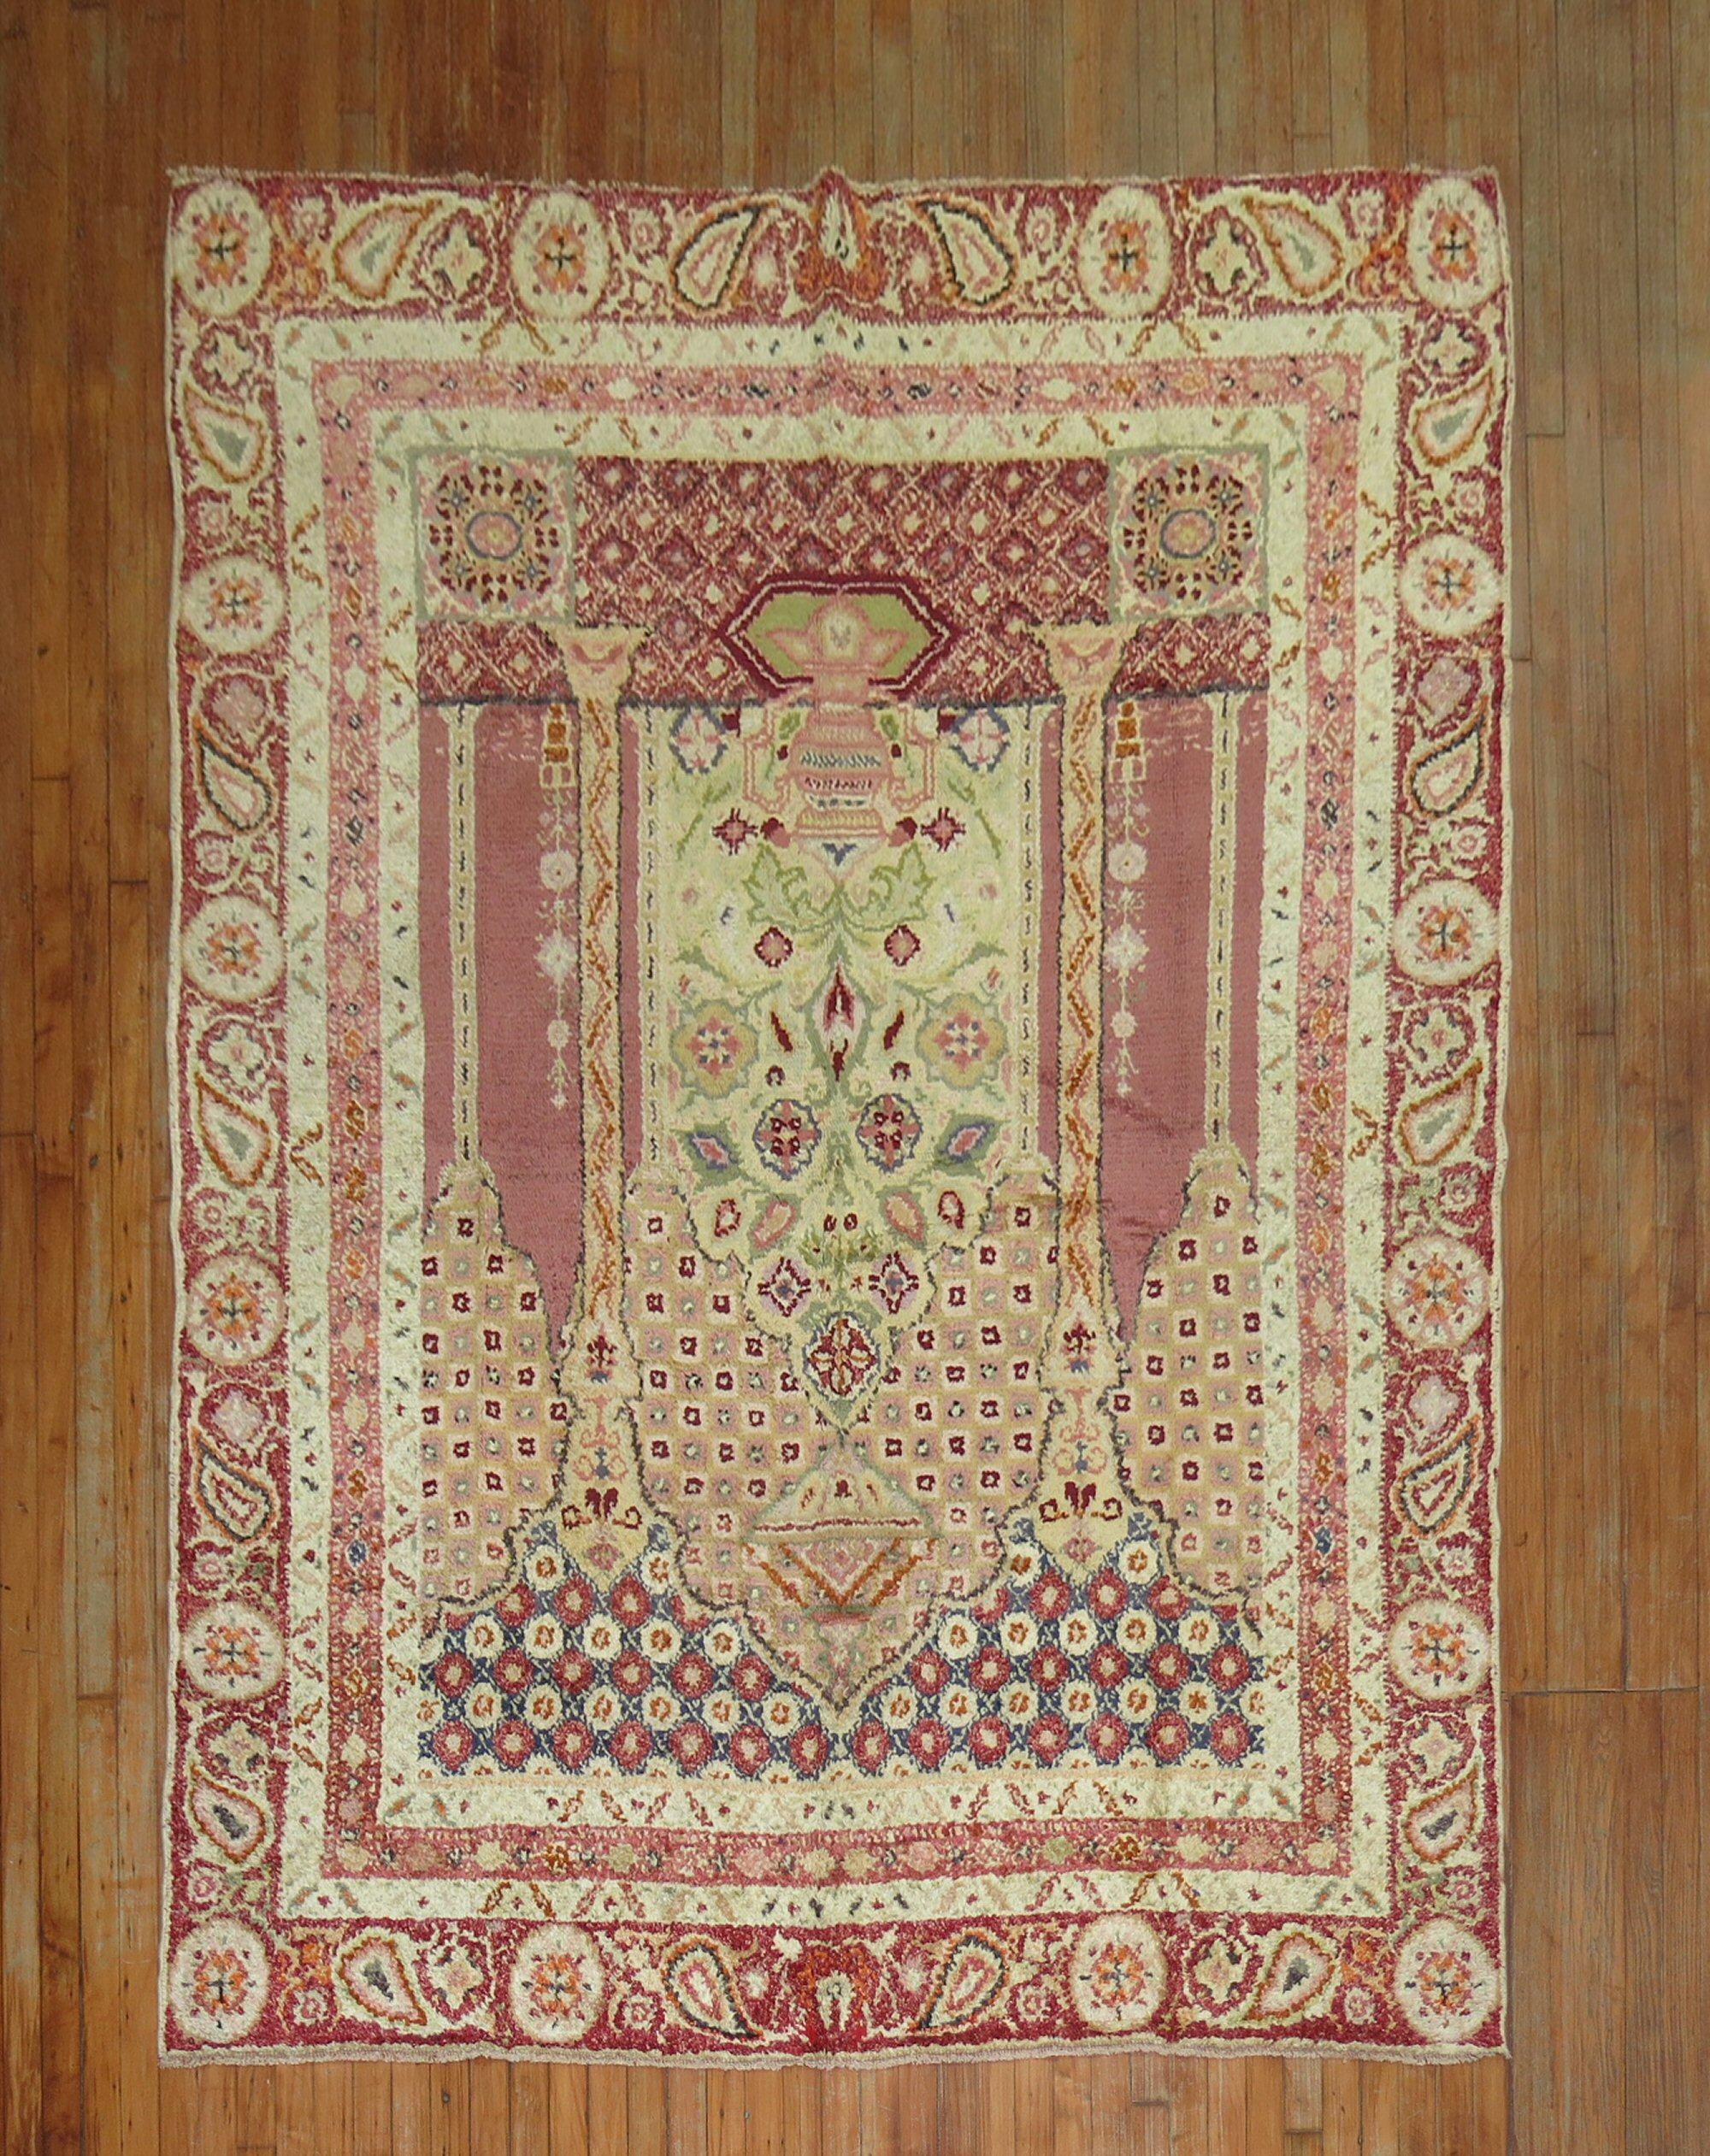 an early 20th-century intermediate-size Turkish Ghiordes rug with a scroll prayer niche design commonly found in smaller scatter and accent sizes. A statement rug in itself

Measures: 6'6'' x 8'6''.